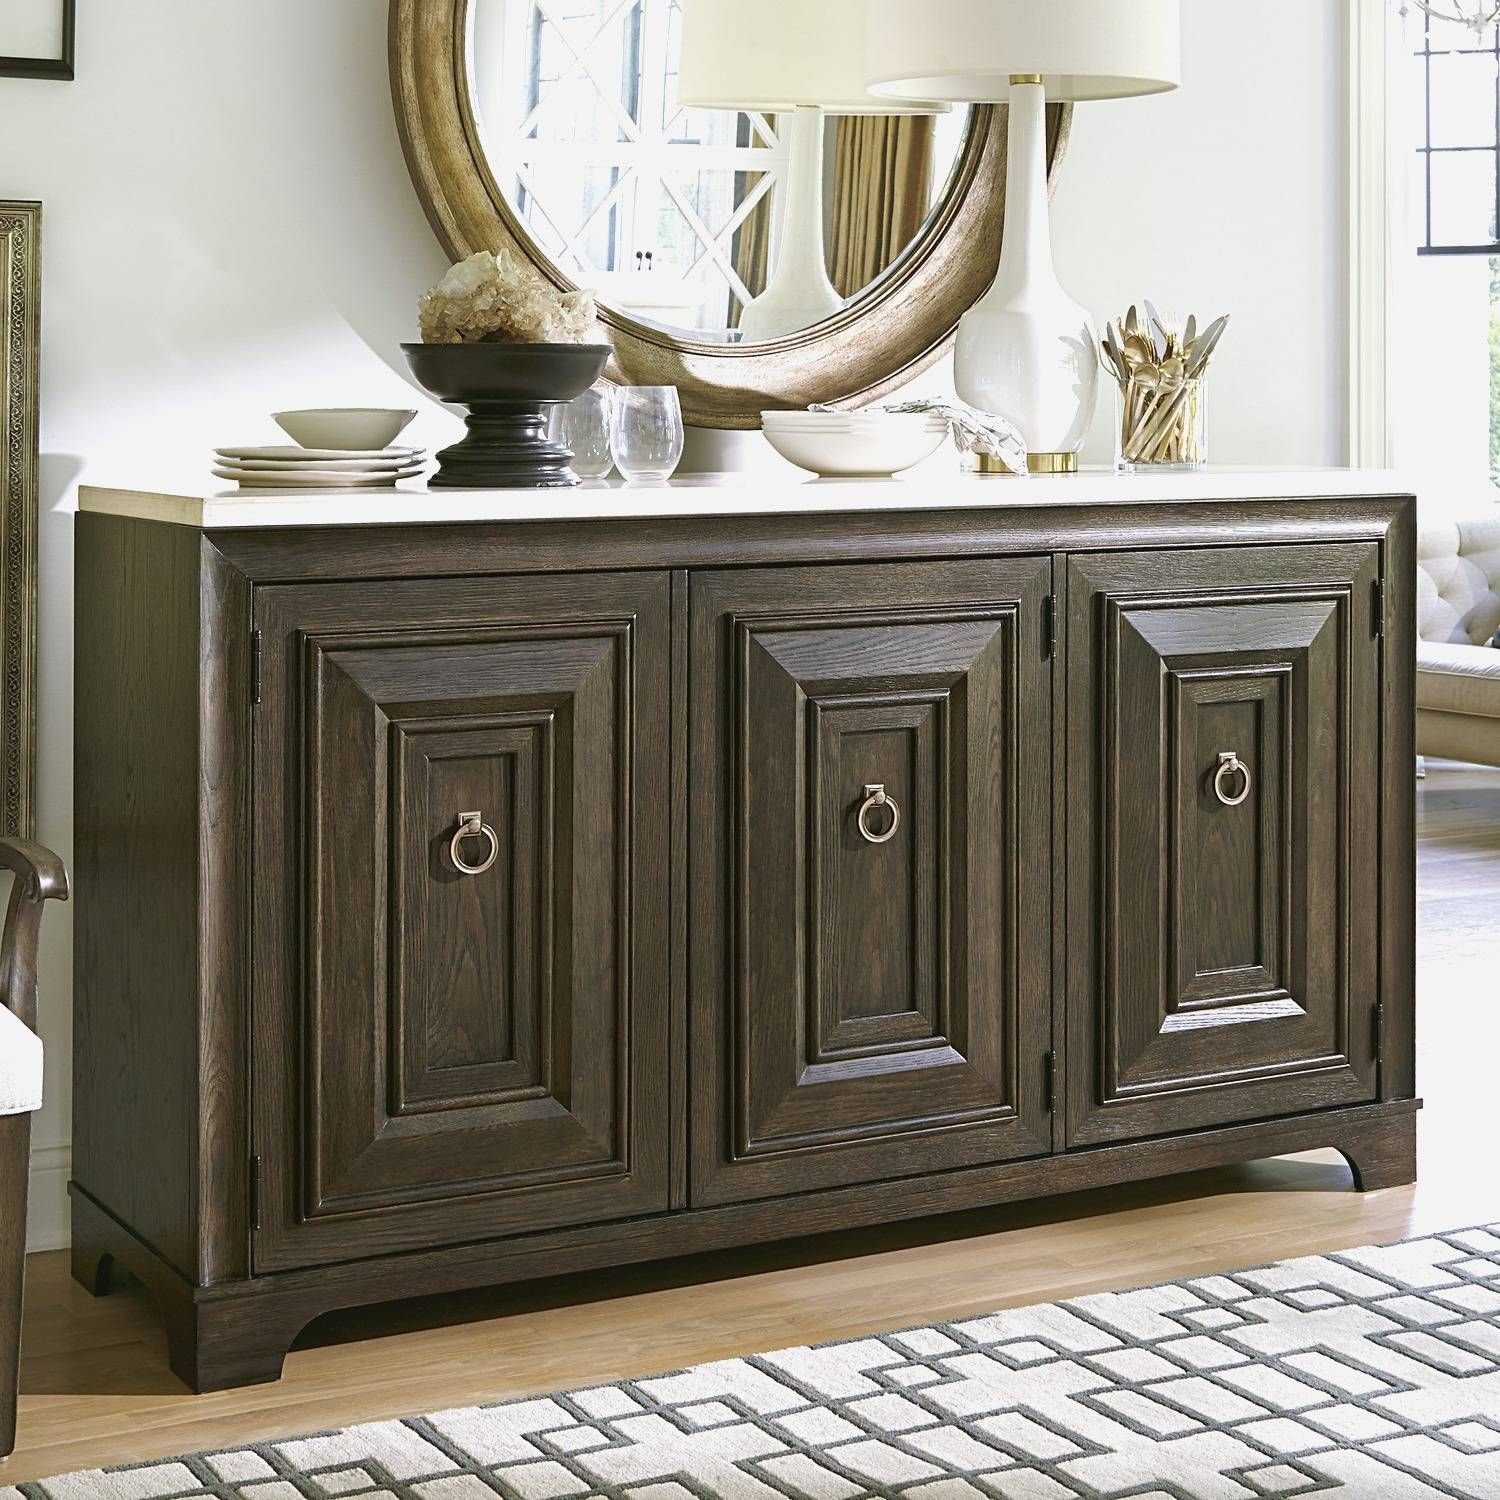 Cabinet : Large Buffets And Sideboards Wonderful Sideboards And Throughout 2017 Mirror Over Sideboards (Photo 15 of 15)